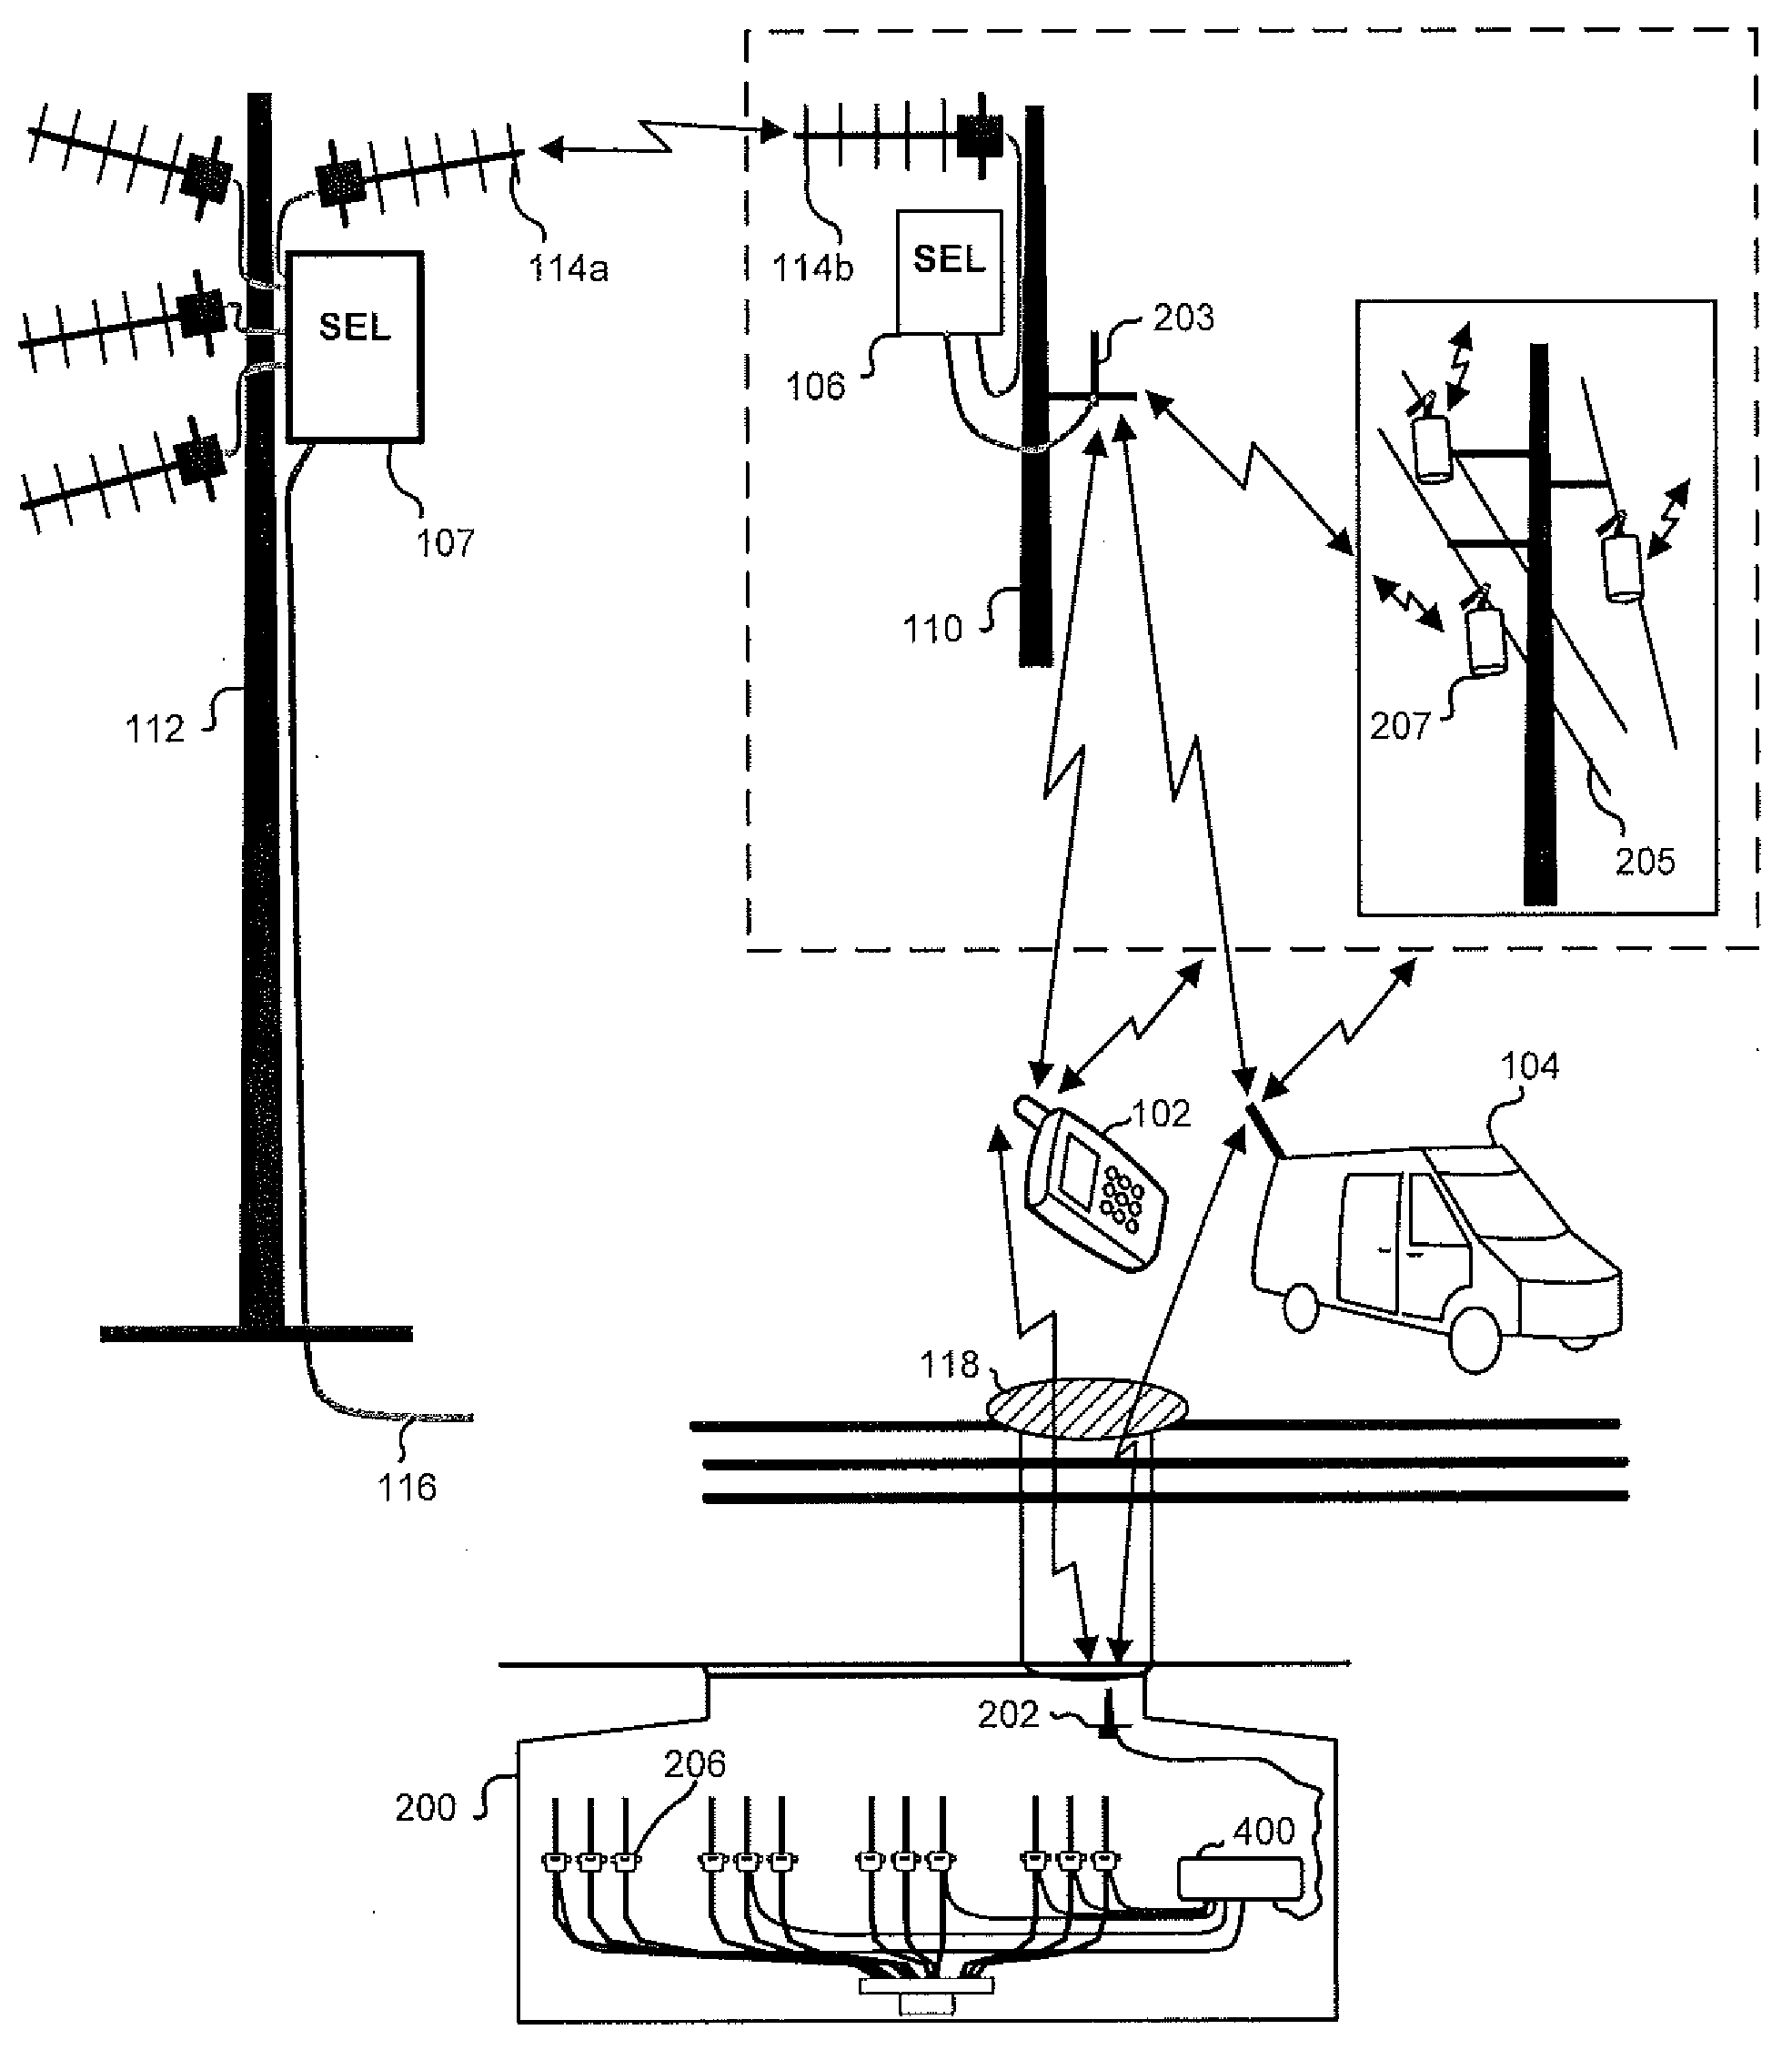 Apparatus and system for adjusting settings of a power system device using a magnetically coupled actuator